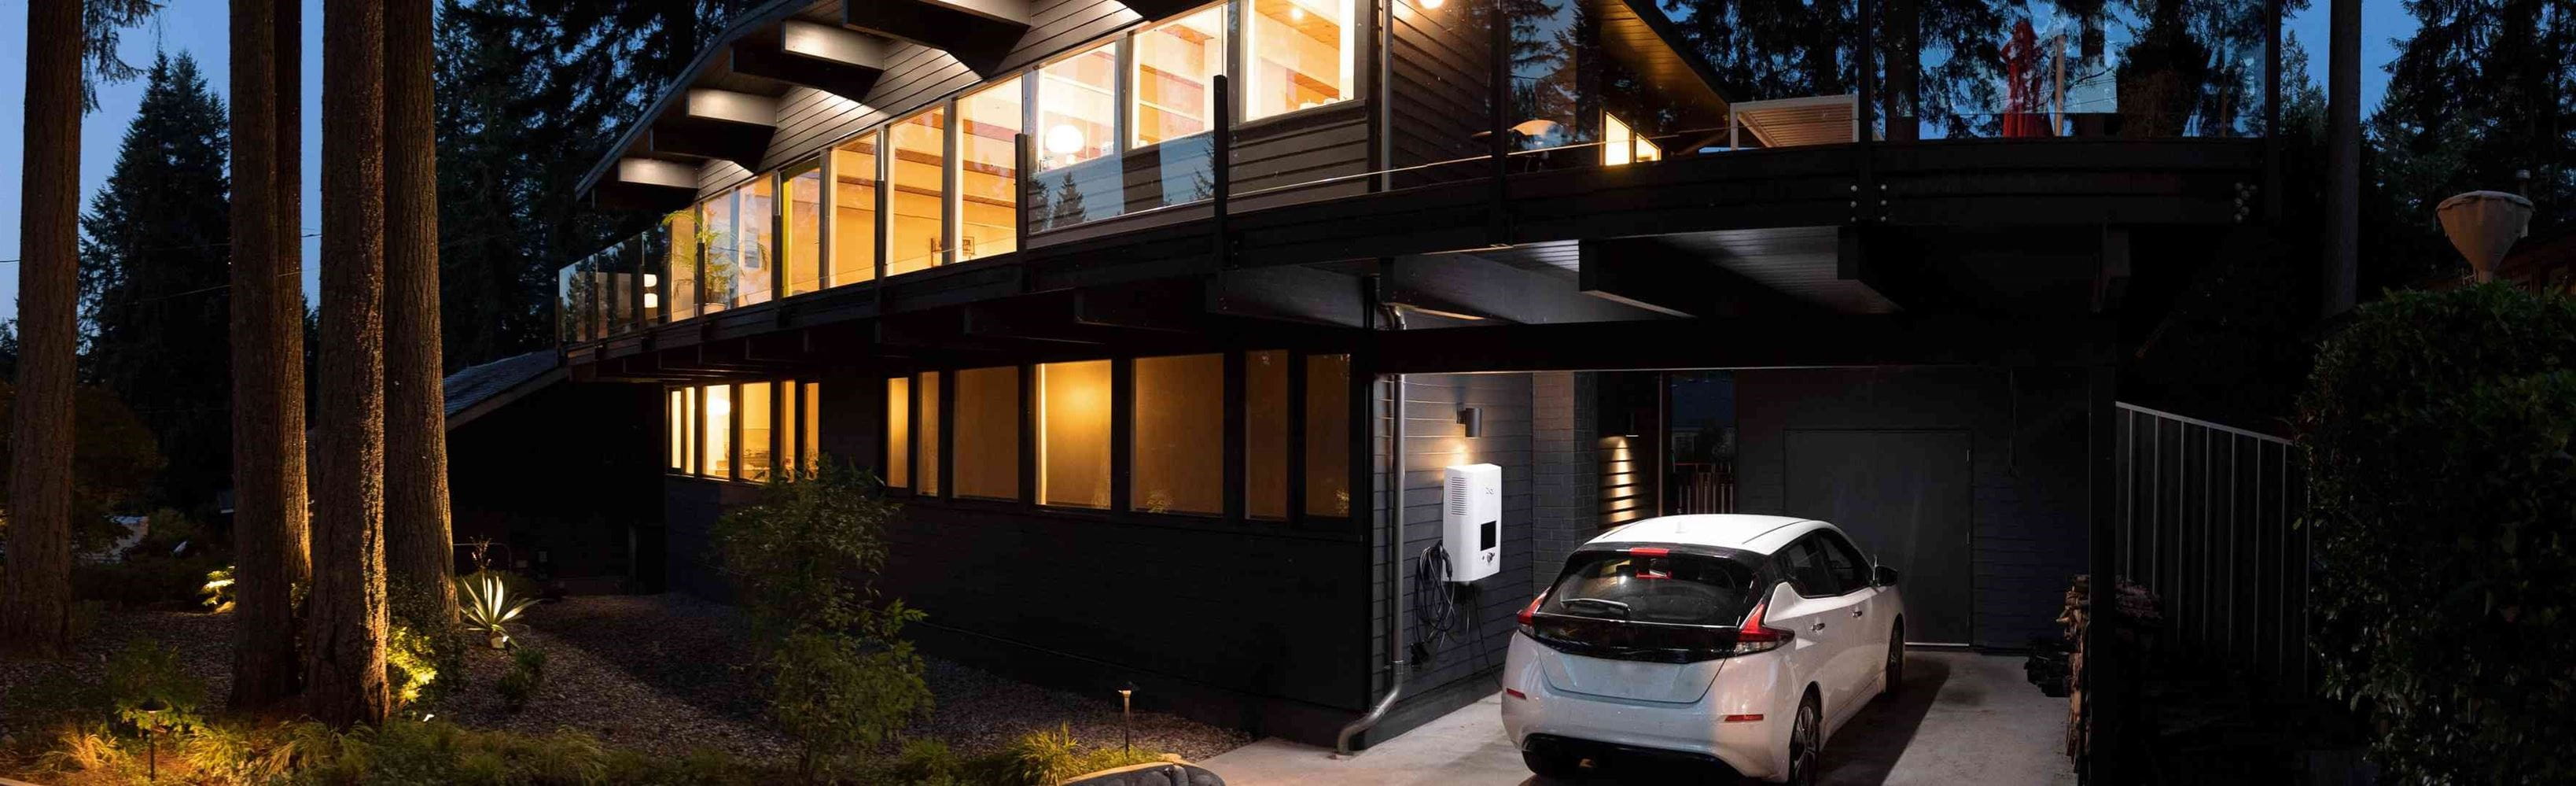 EV charging at home - car on right